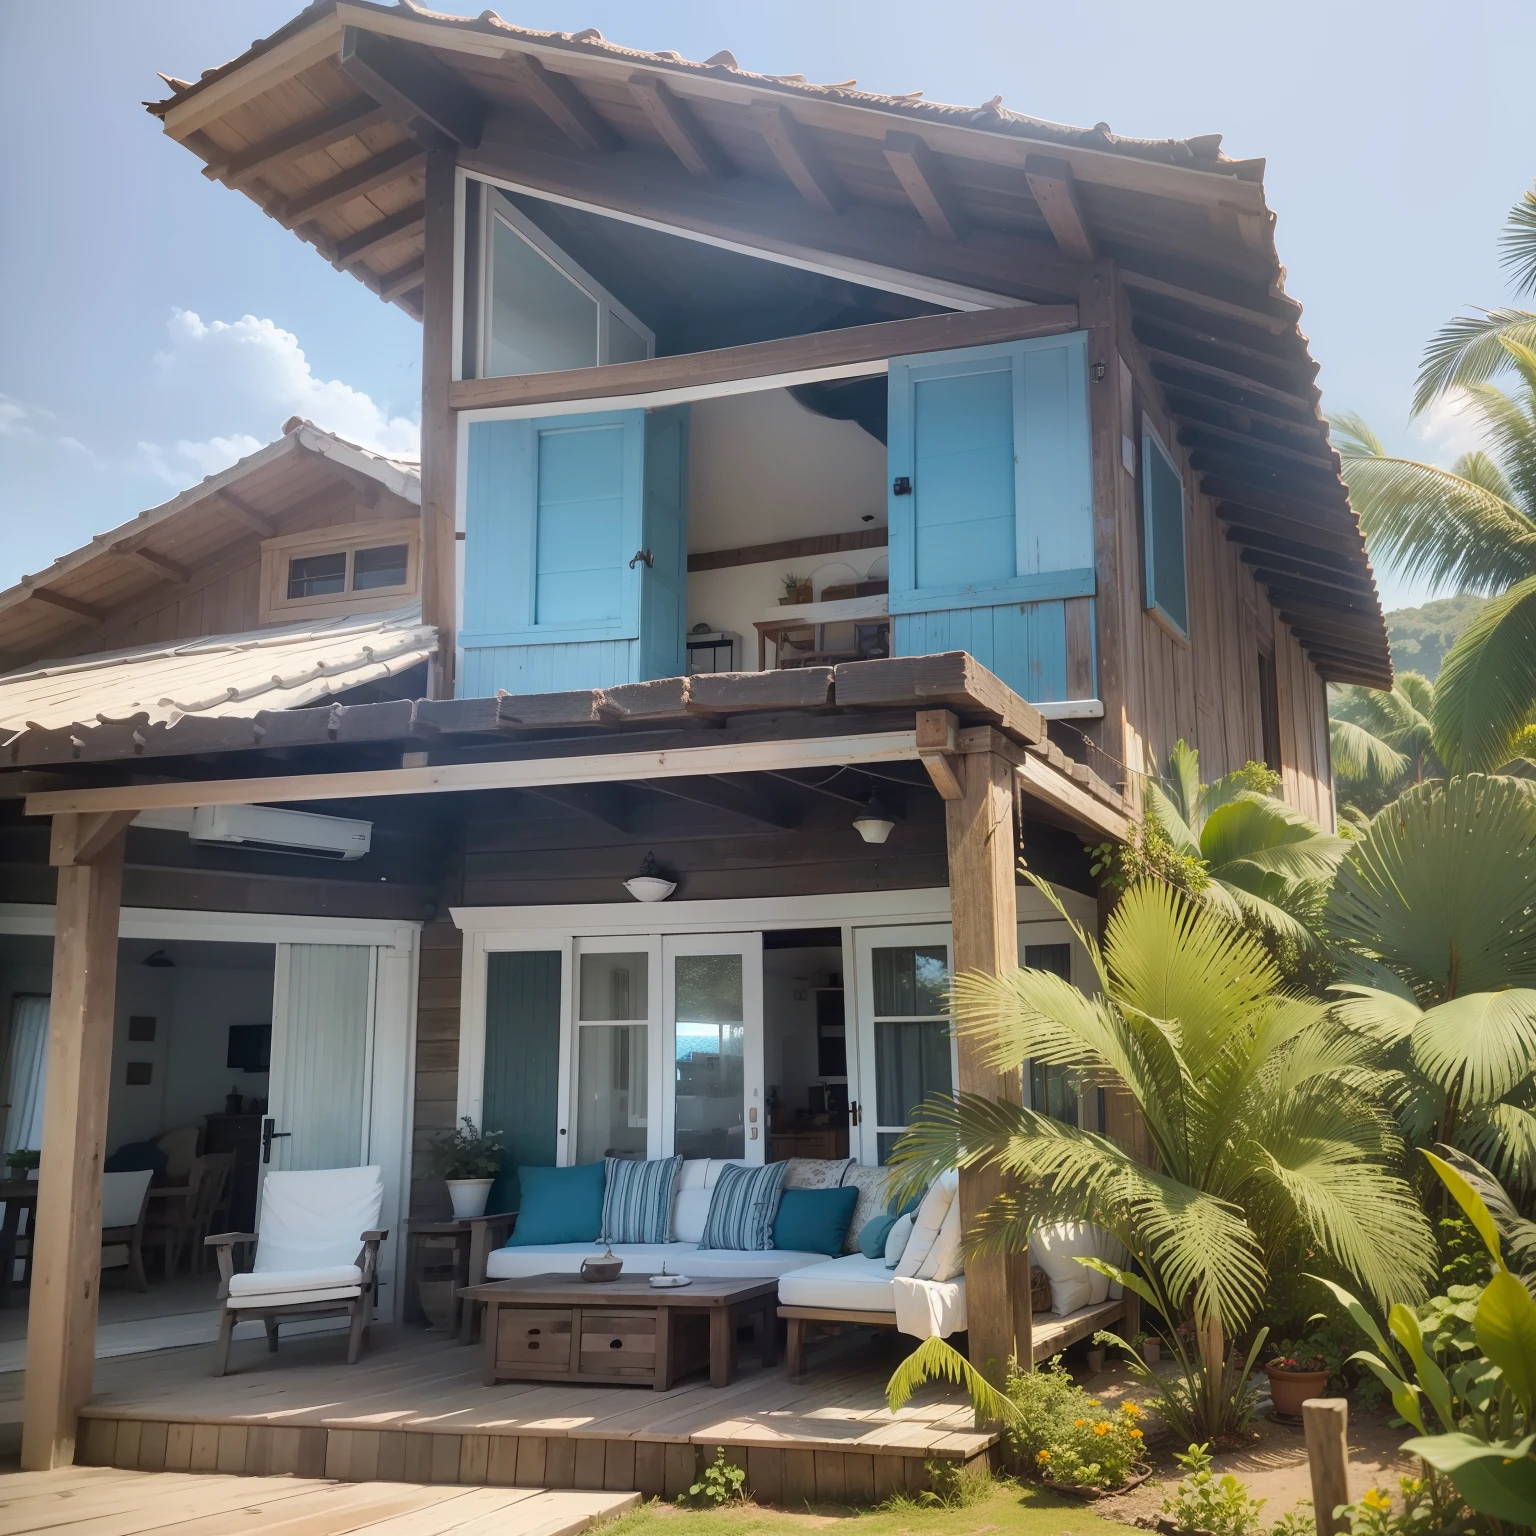 create a house facing the sea in Arraial d&#39;ajuda Porto Seguro-Bh. rustic and with plenty of glazed area. an open balcony with wooden floors , having a rustic wicker table with glass and wicker chairs and a wicker bench, rustic cantilevered chairs